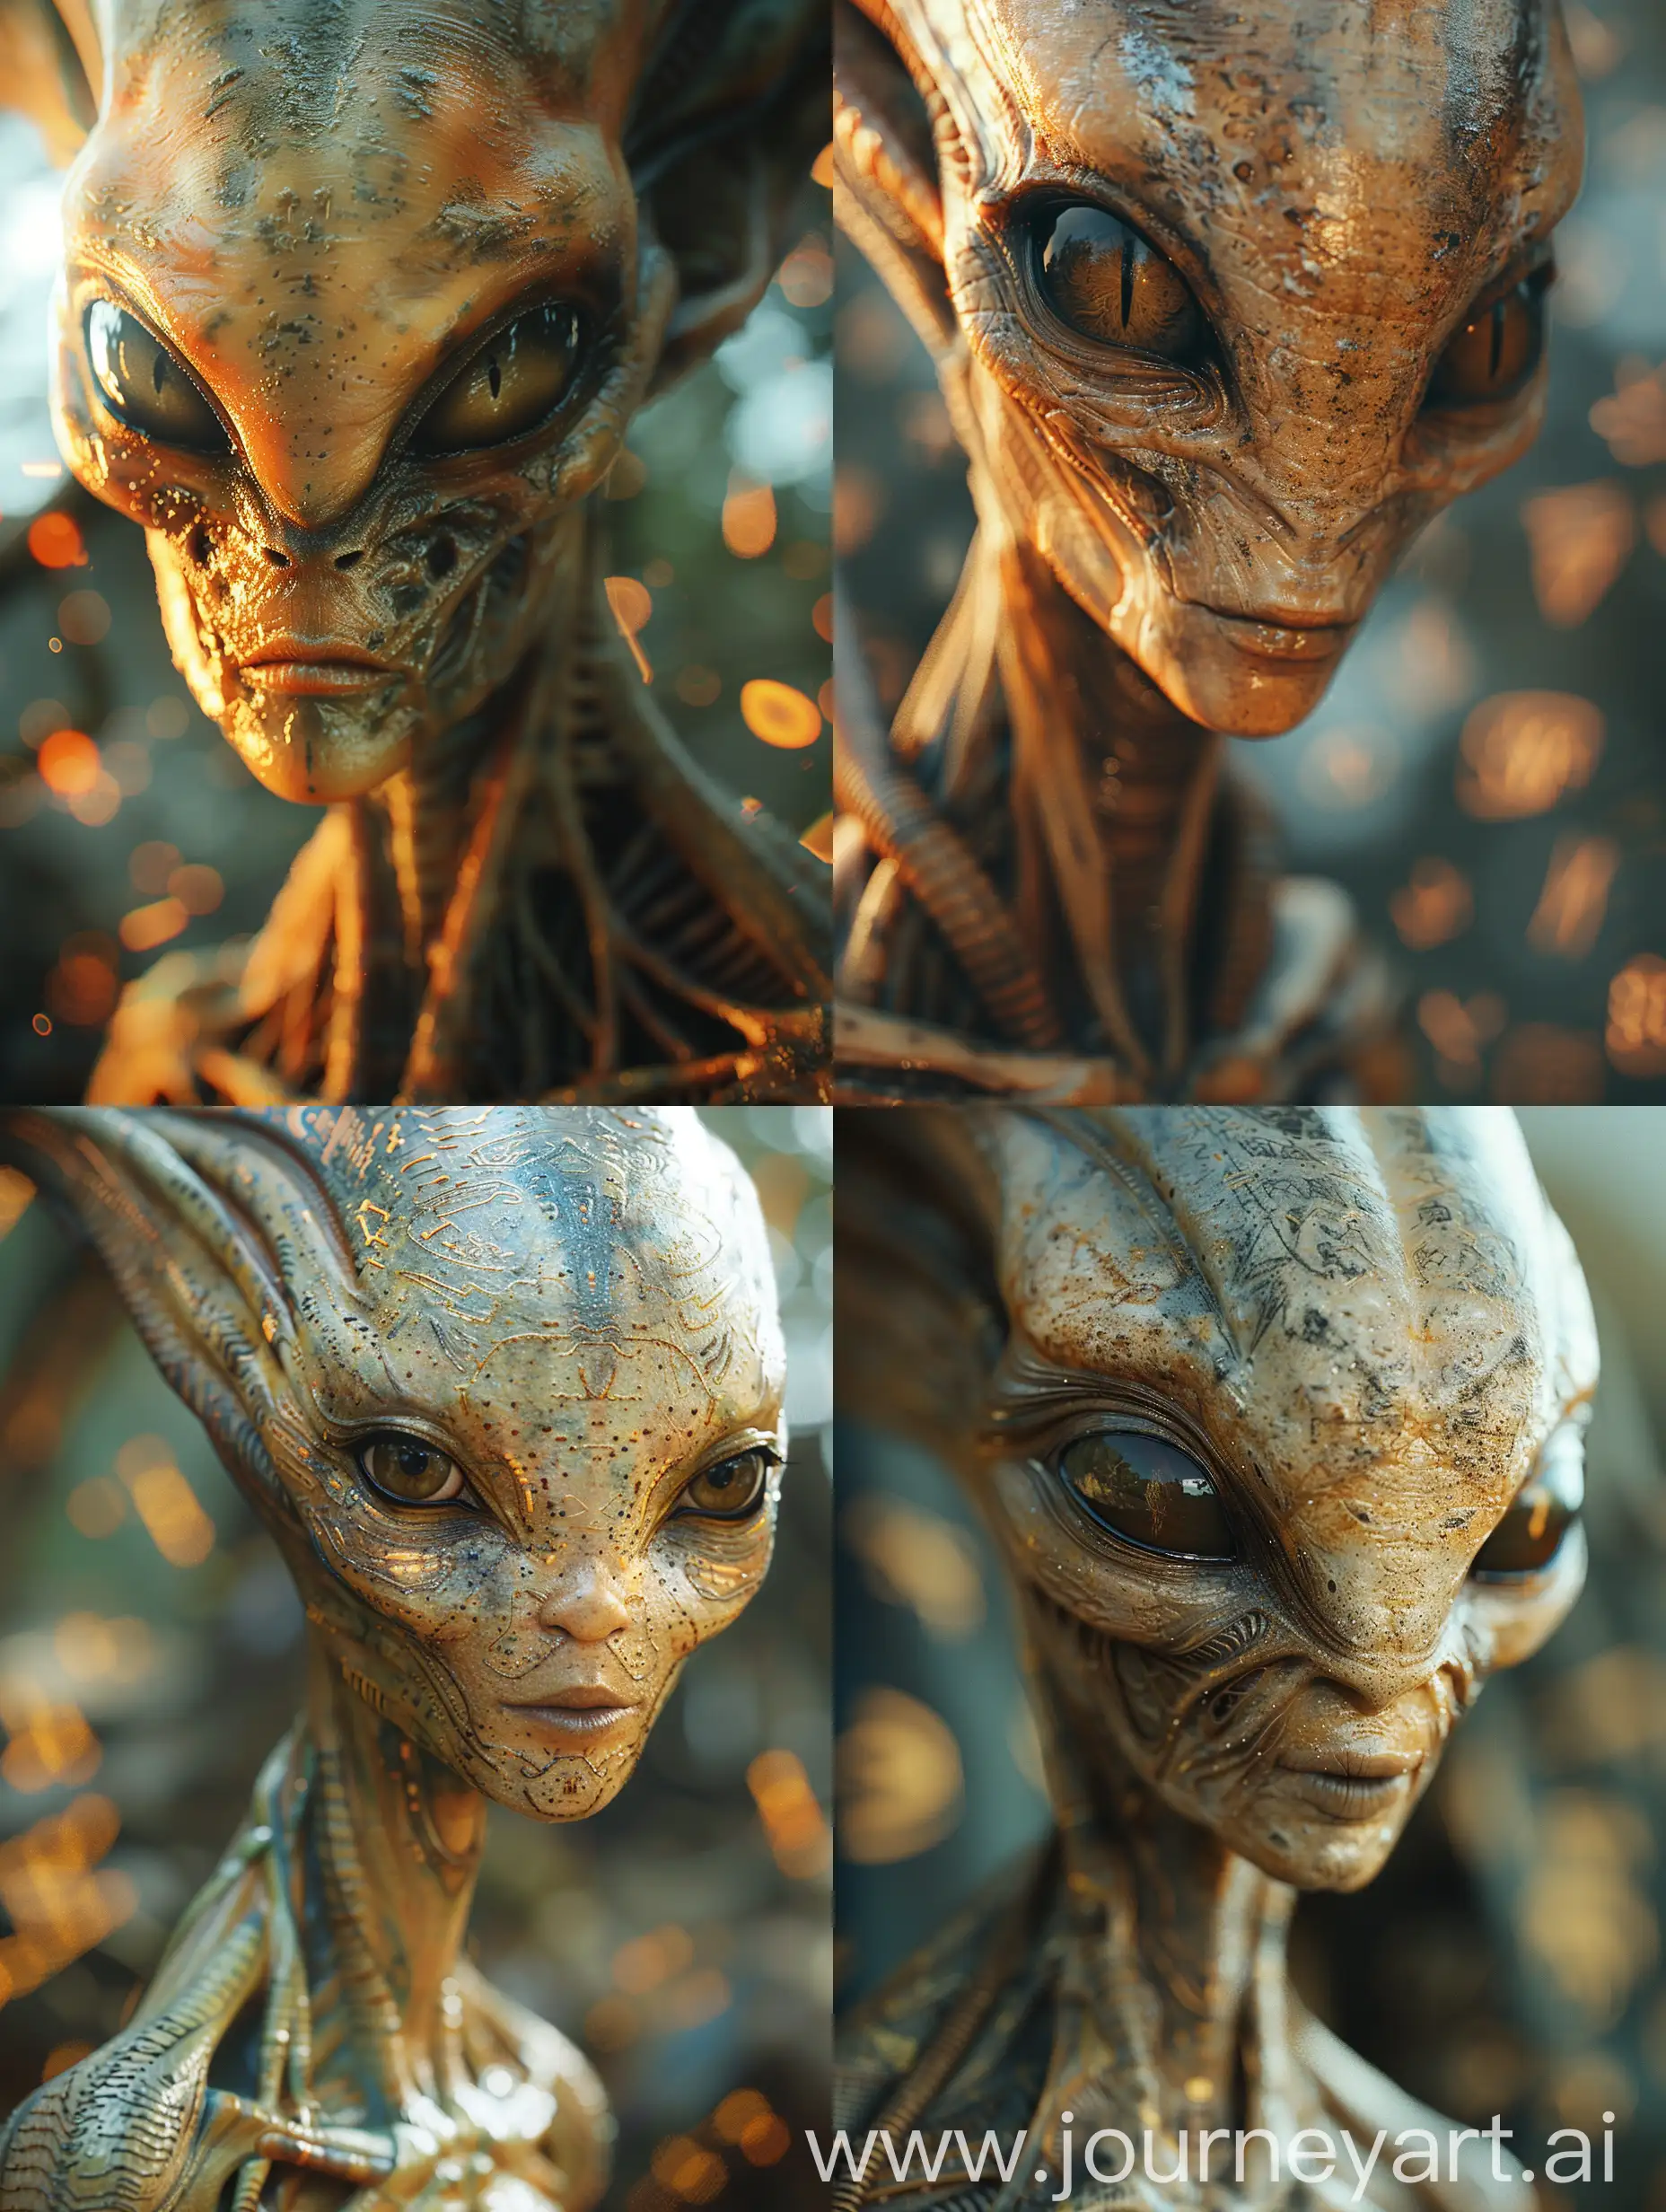 close-up of an alien being with intricate facial features. Set against a blurred background filled with mysterious symbols, intense and captivating, Photographic style using a Macro lens, emphasizing the detail in the alien's face and the interplay of light on its skin  --stylise 750